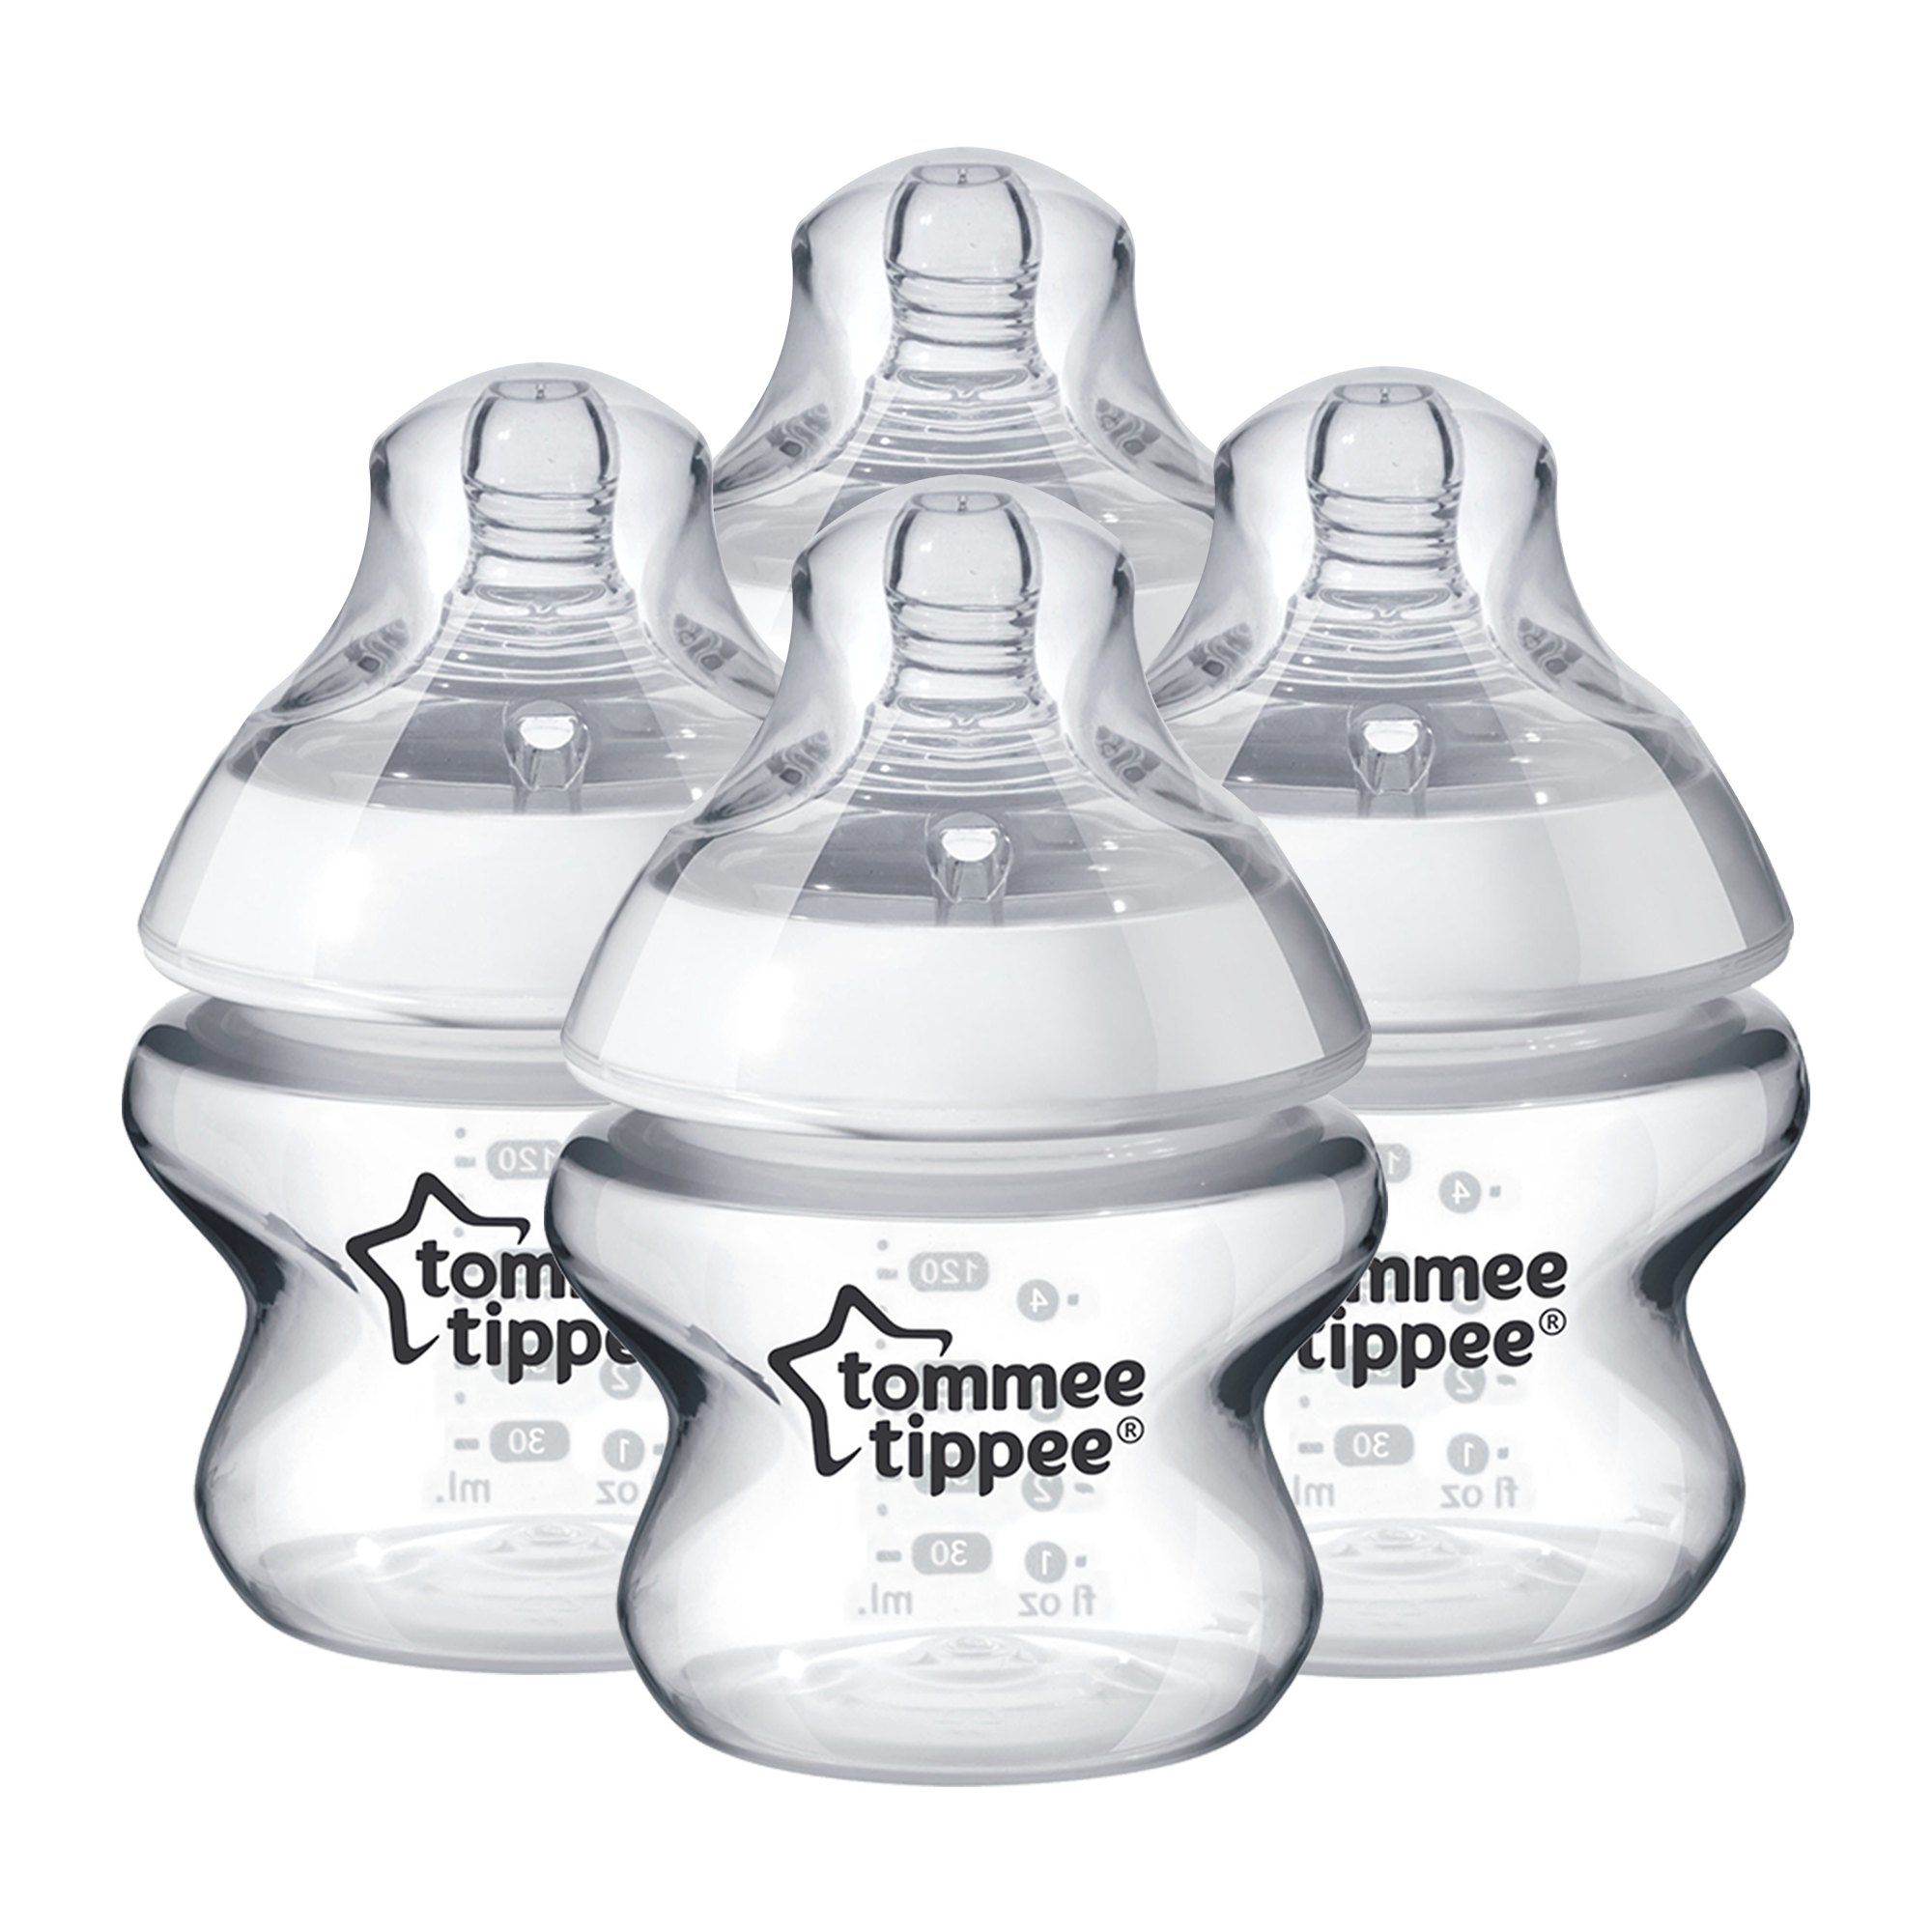 Tommee Tippee Closer to Nature Baby Bottle | Breast-Like Nipple with Anti-Colic Valve, BPA-free – 5-ounce, 4 Count - image 1 of 10